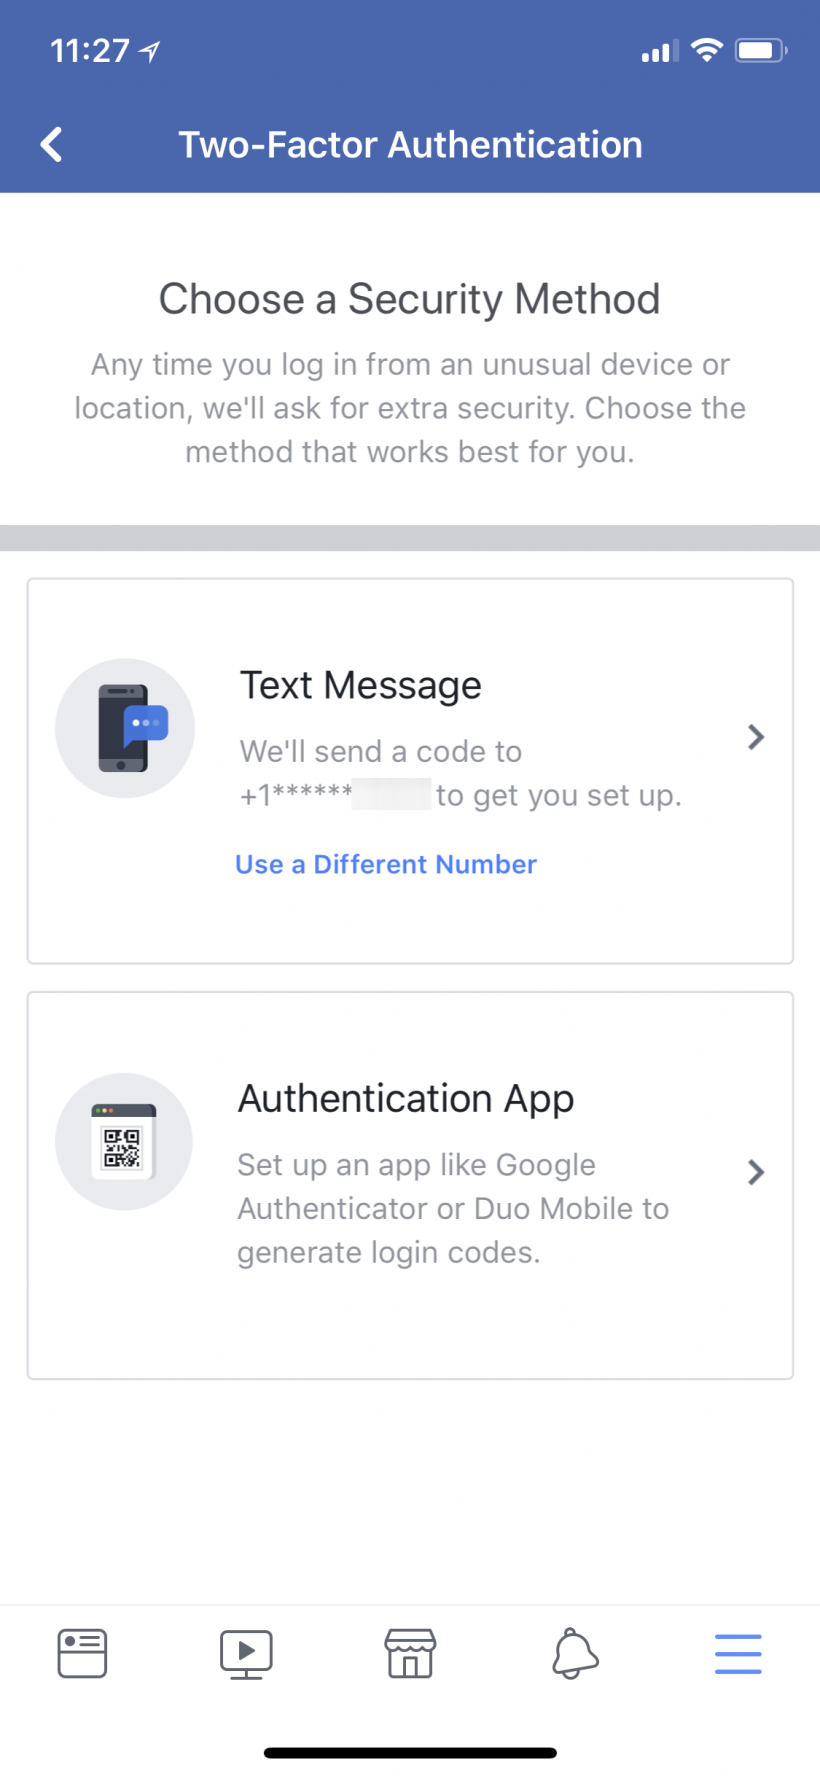 How to activate 2FA two-factor authentication on Facebook on iPhone and iPad.